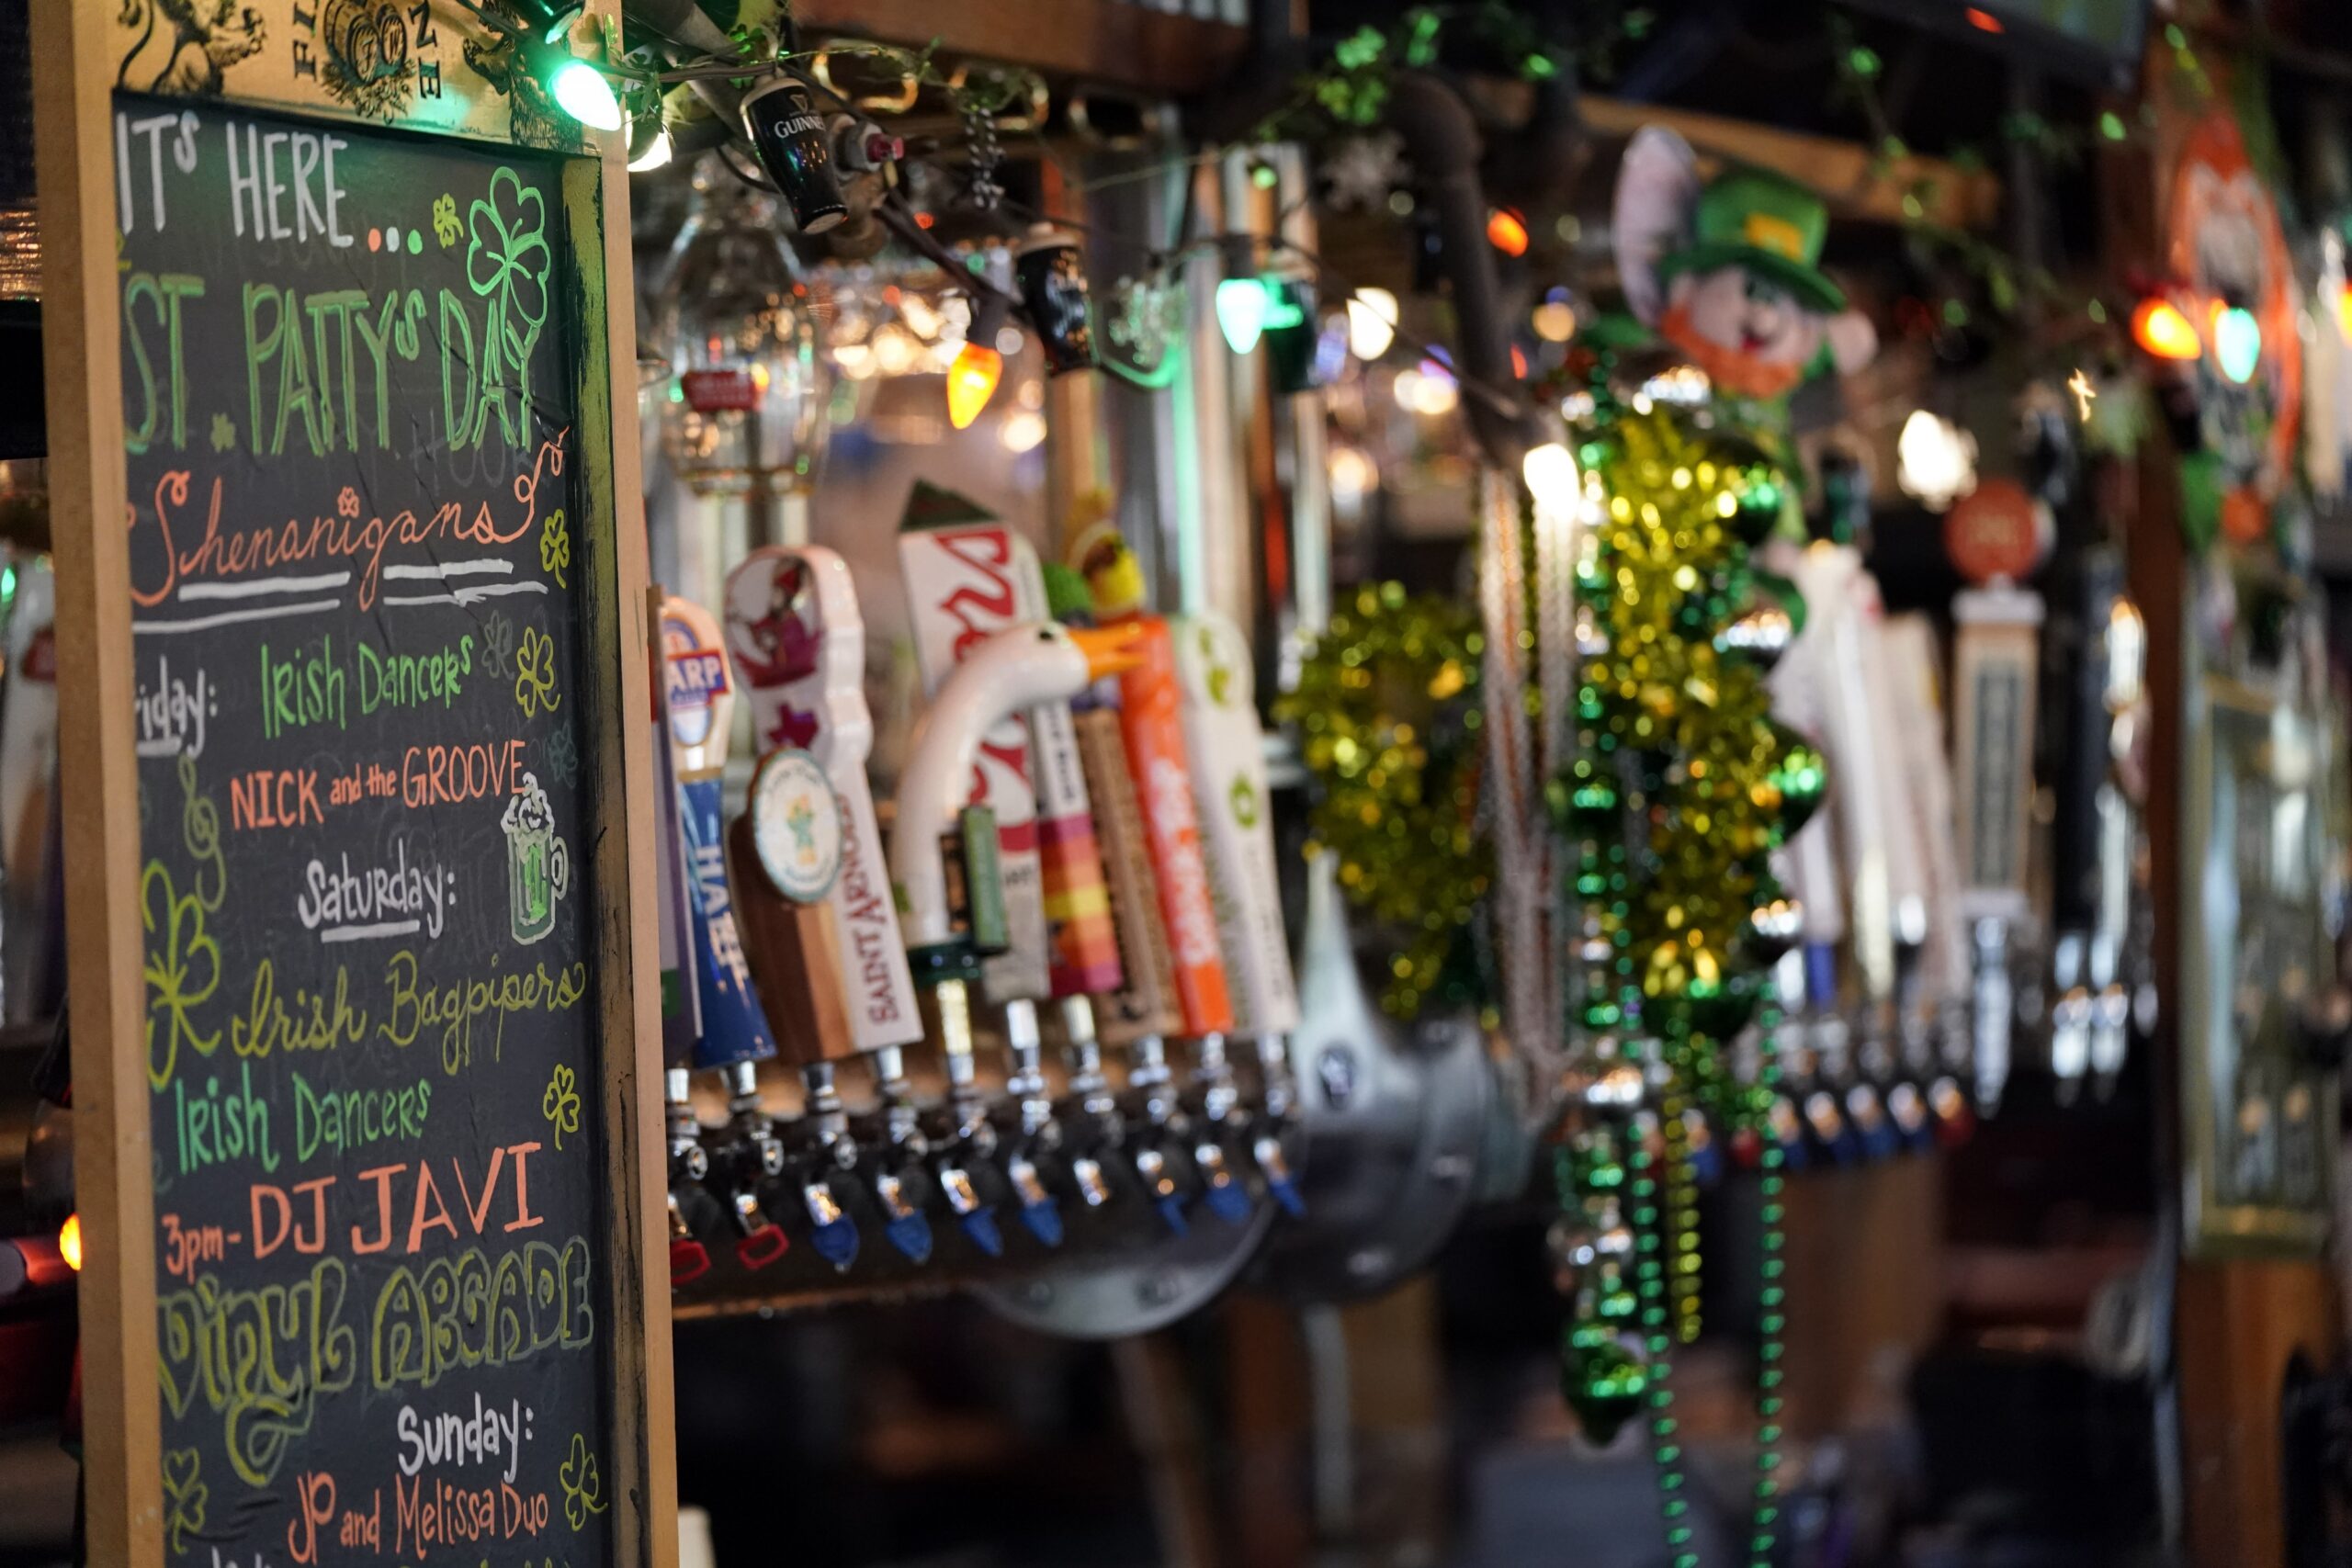 Beer taps are idle at Mo's Irish Pub on St. Patrick's Day.